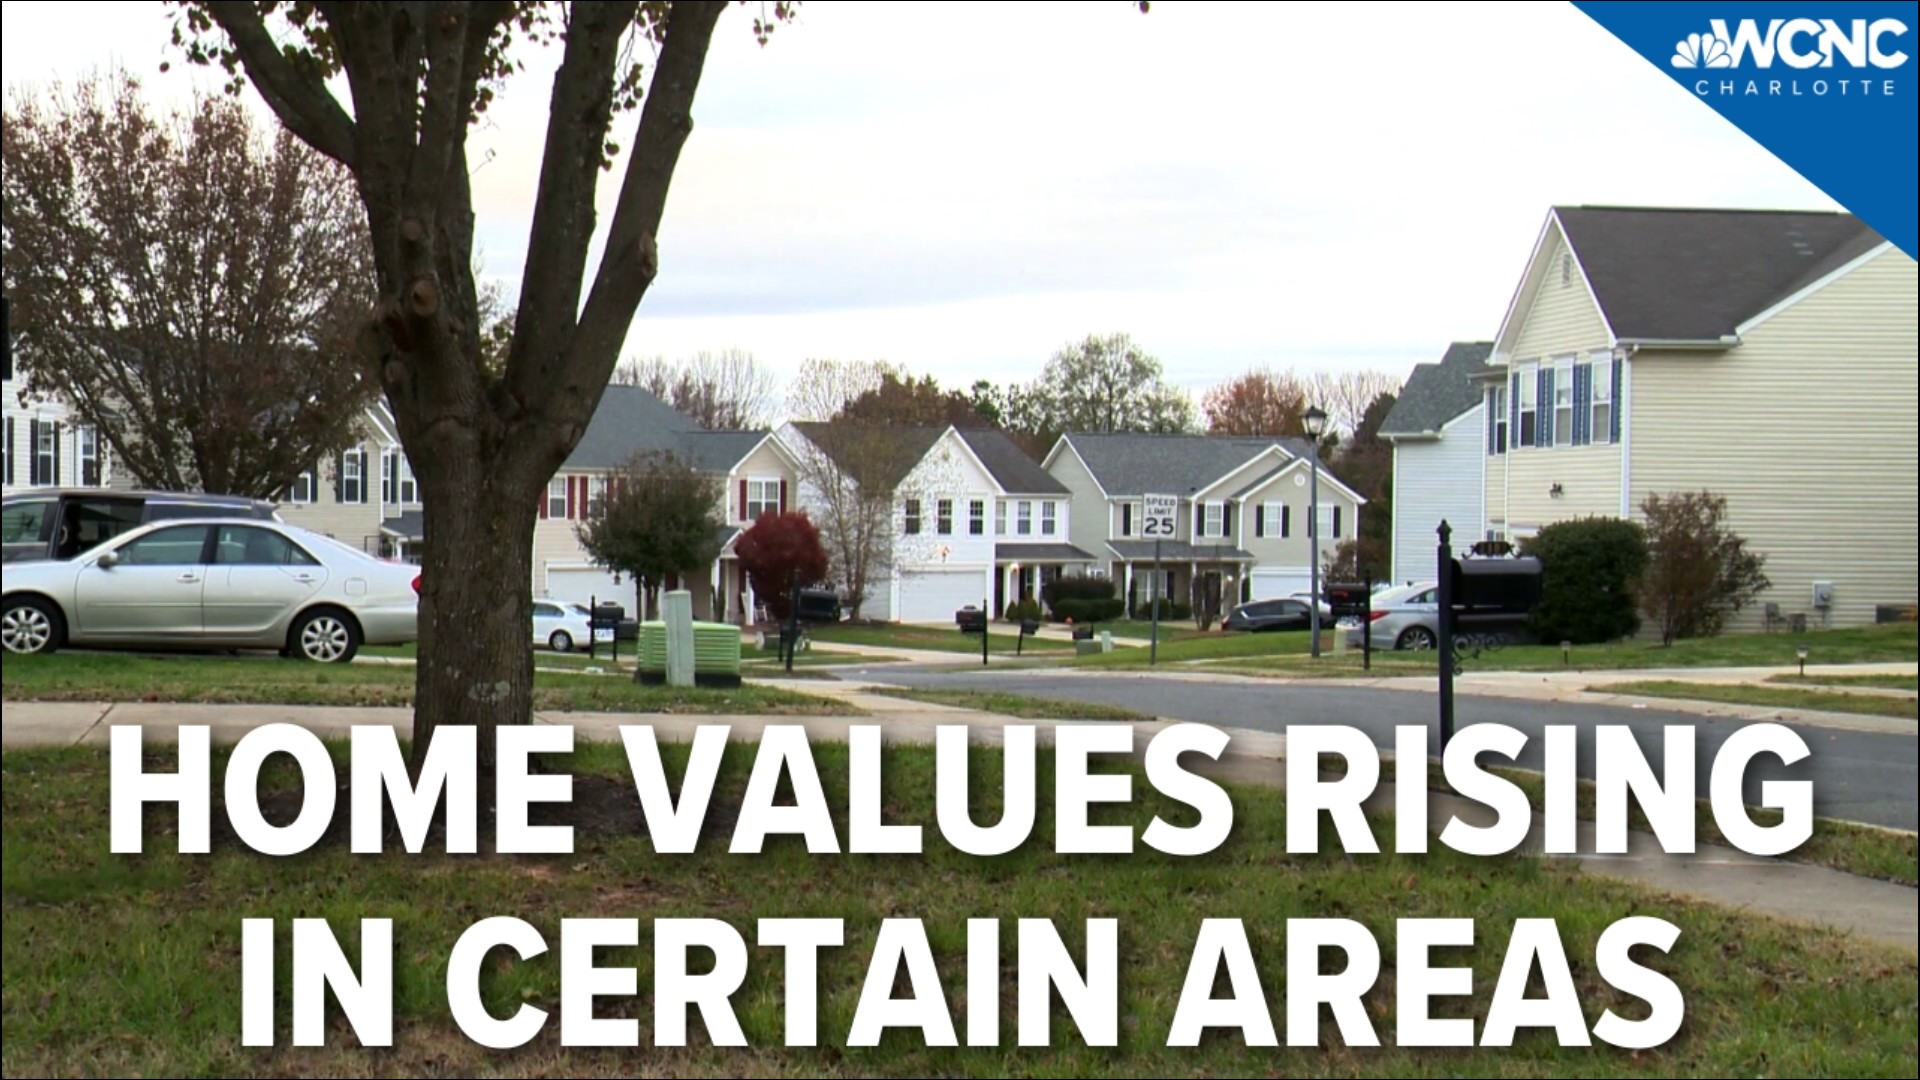 If you live north or west of Uptown Charlotte, home values have increase much more than other neighborhoods.